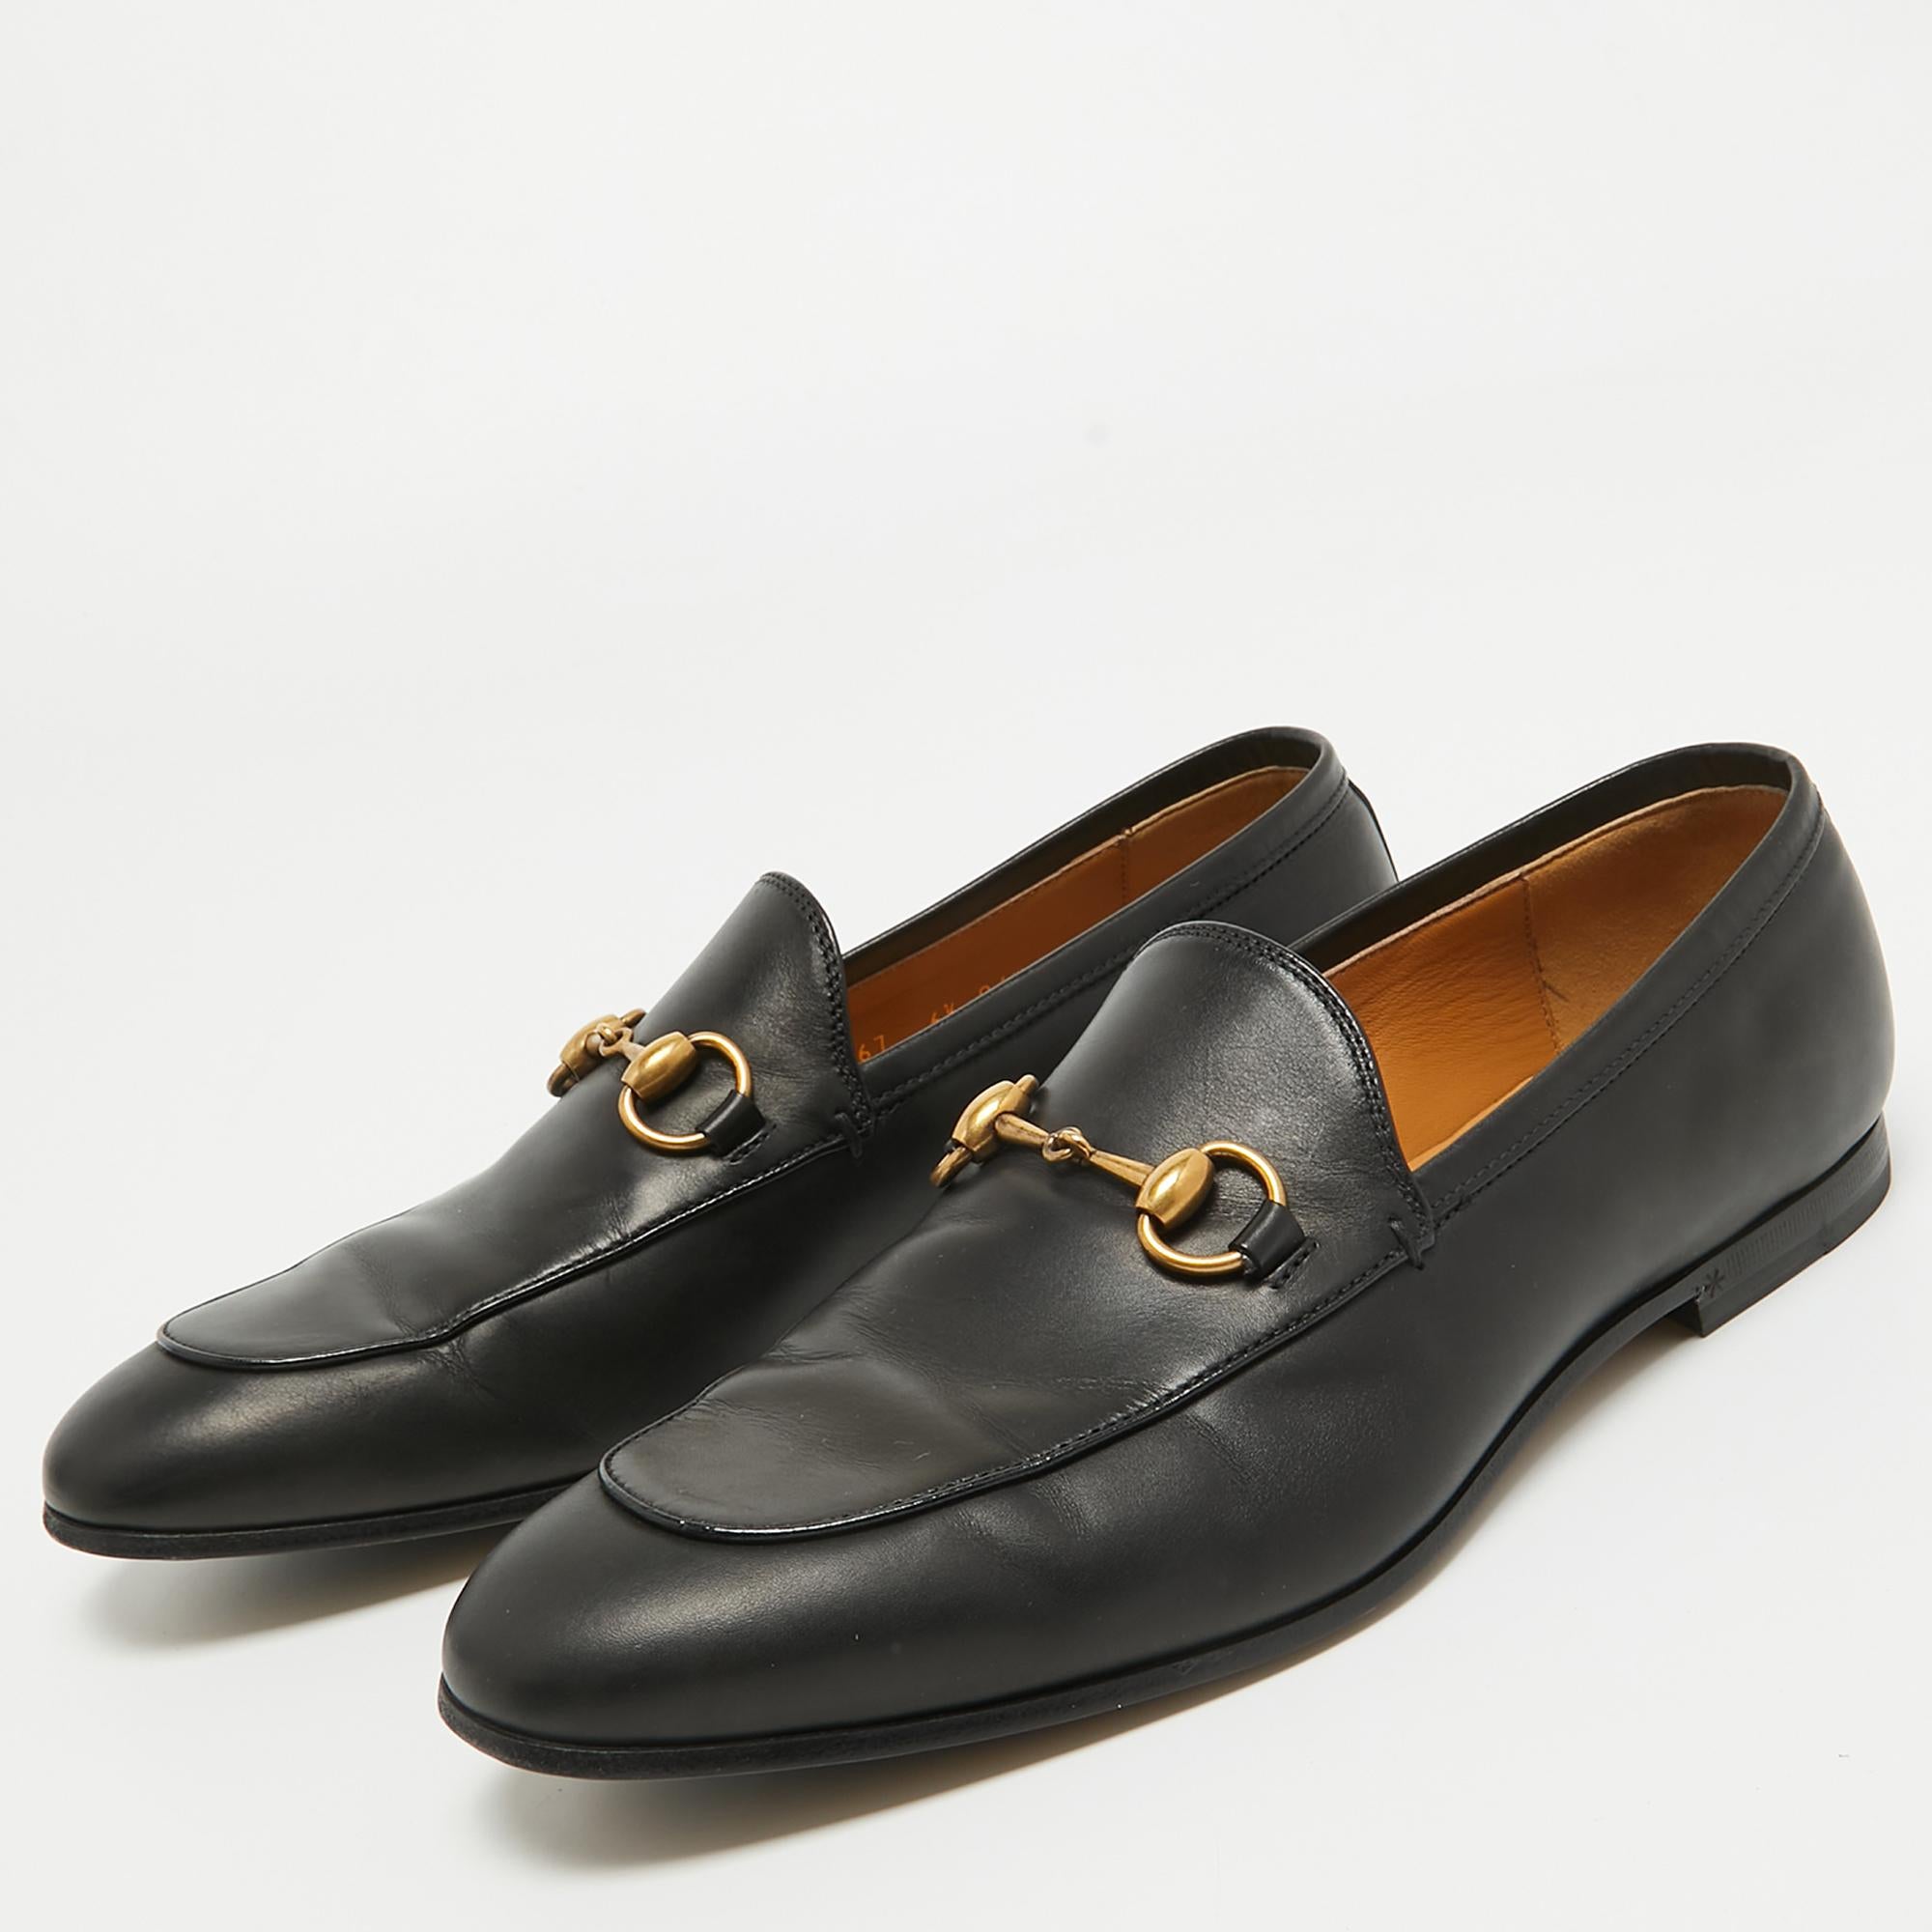 Gucci Black Leather Jordaan Loafers Size 40.5 For Sale 4